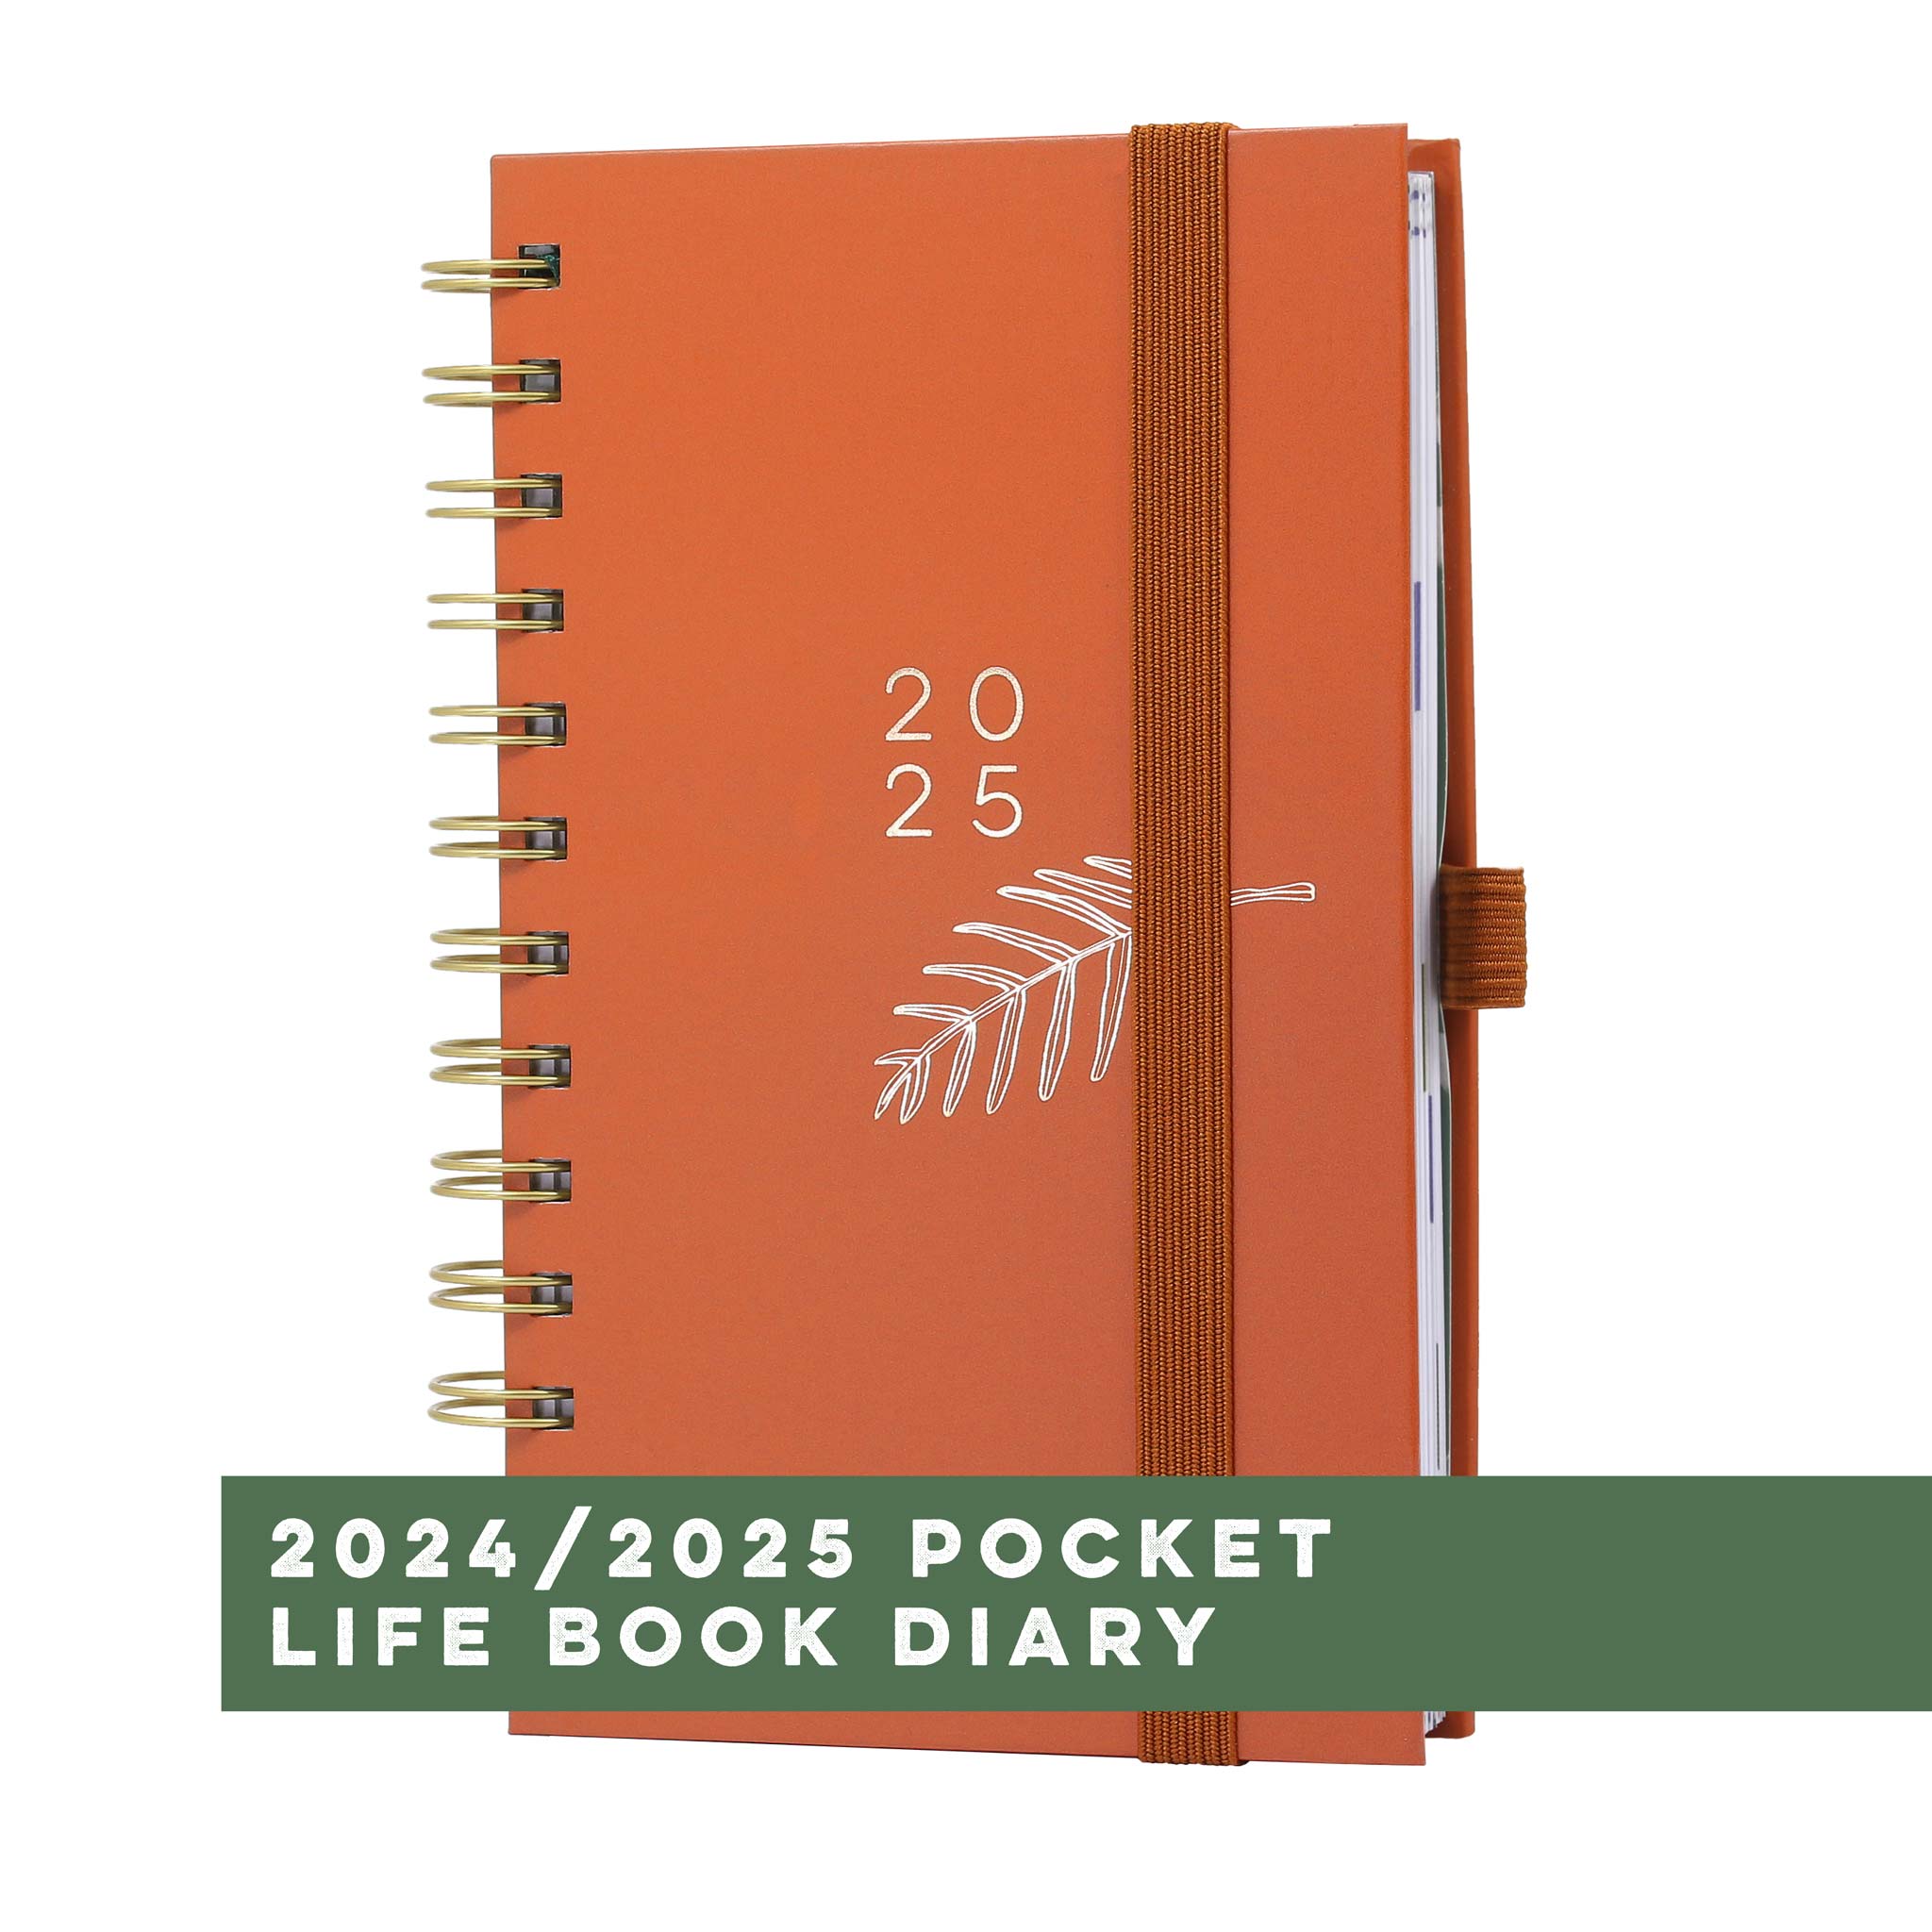 Boxclever Press Pocket Life Book Diary 2025 with an orange and gold leaf design